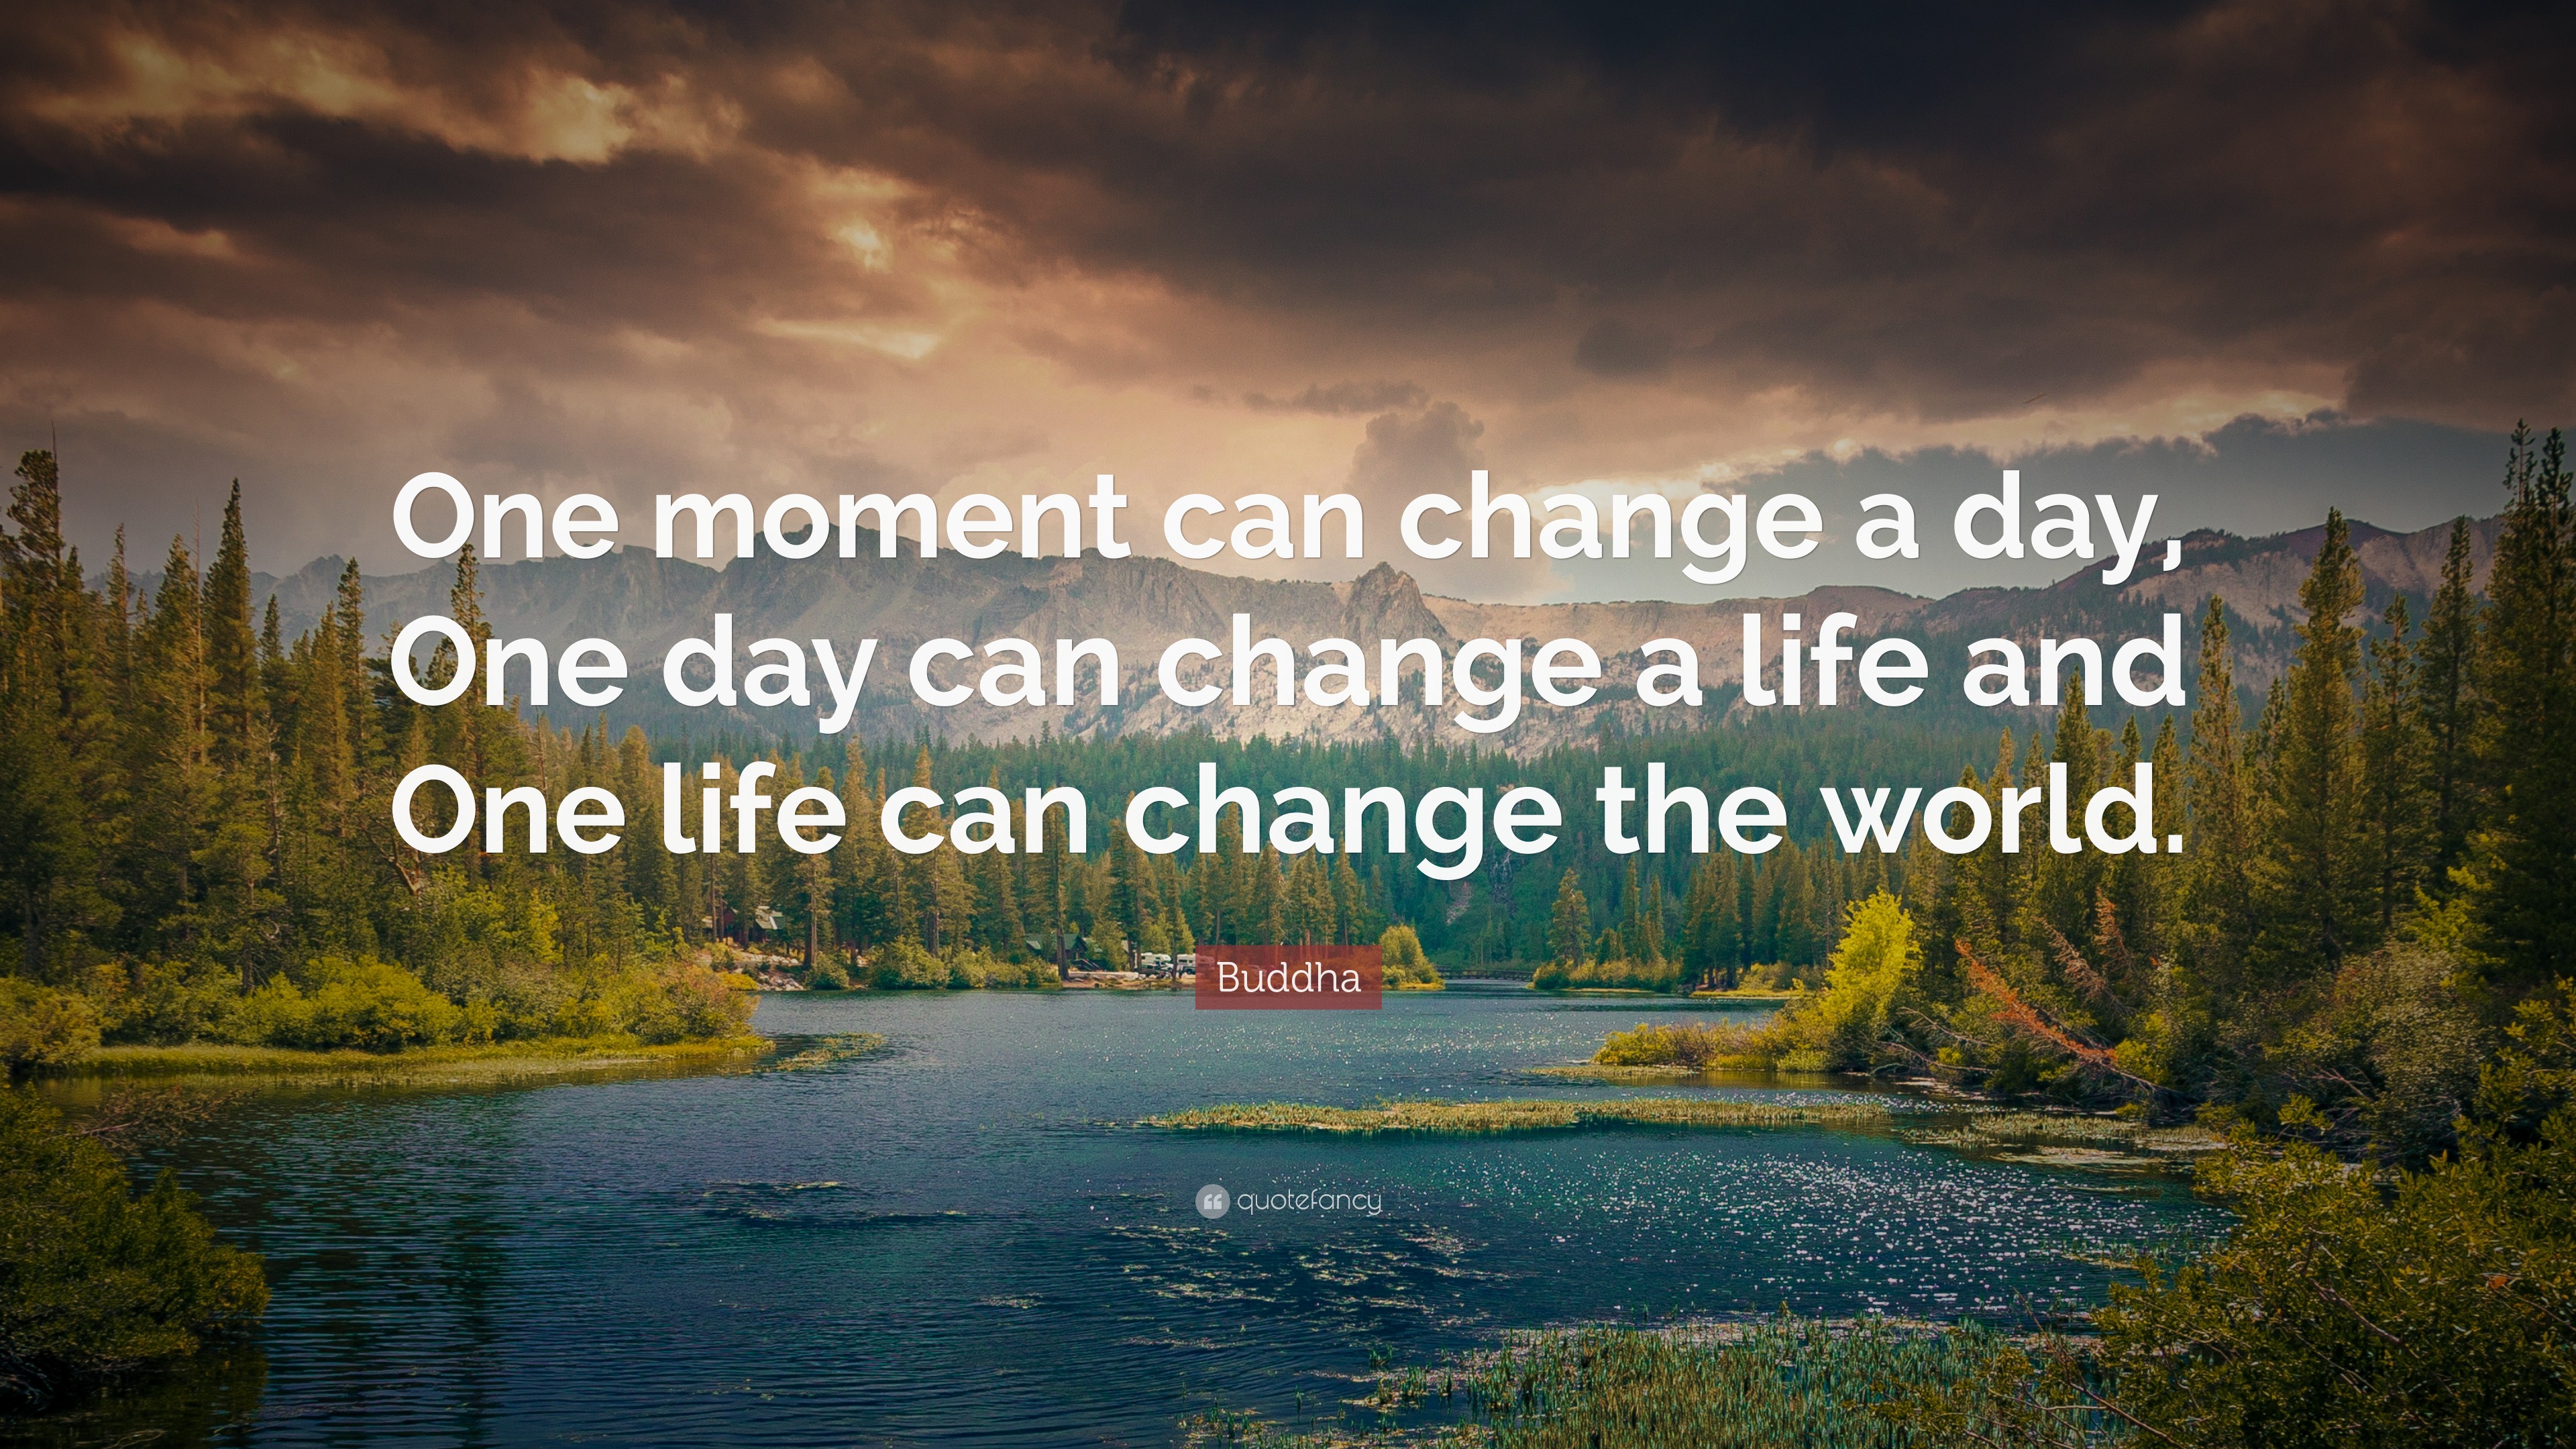 Buddha Quote “One moment can change a day, One day can